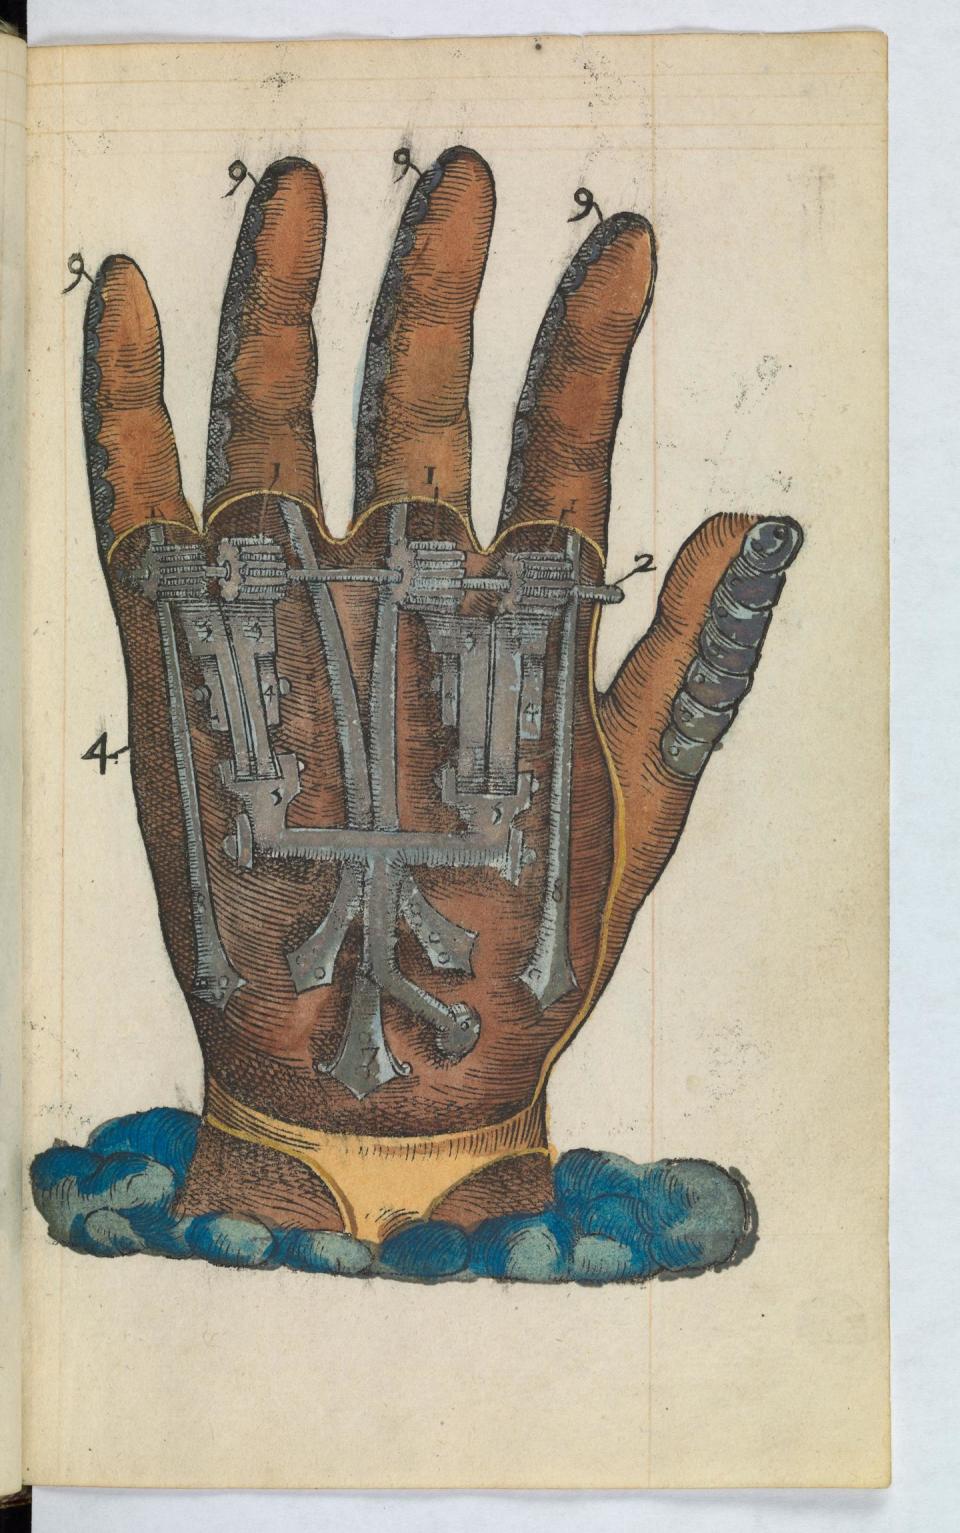 Illustration of mechanical iron hand, cross-sectioned to reveal the gears beneath the flesh